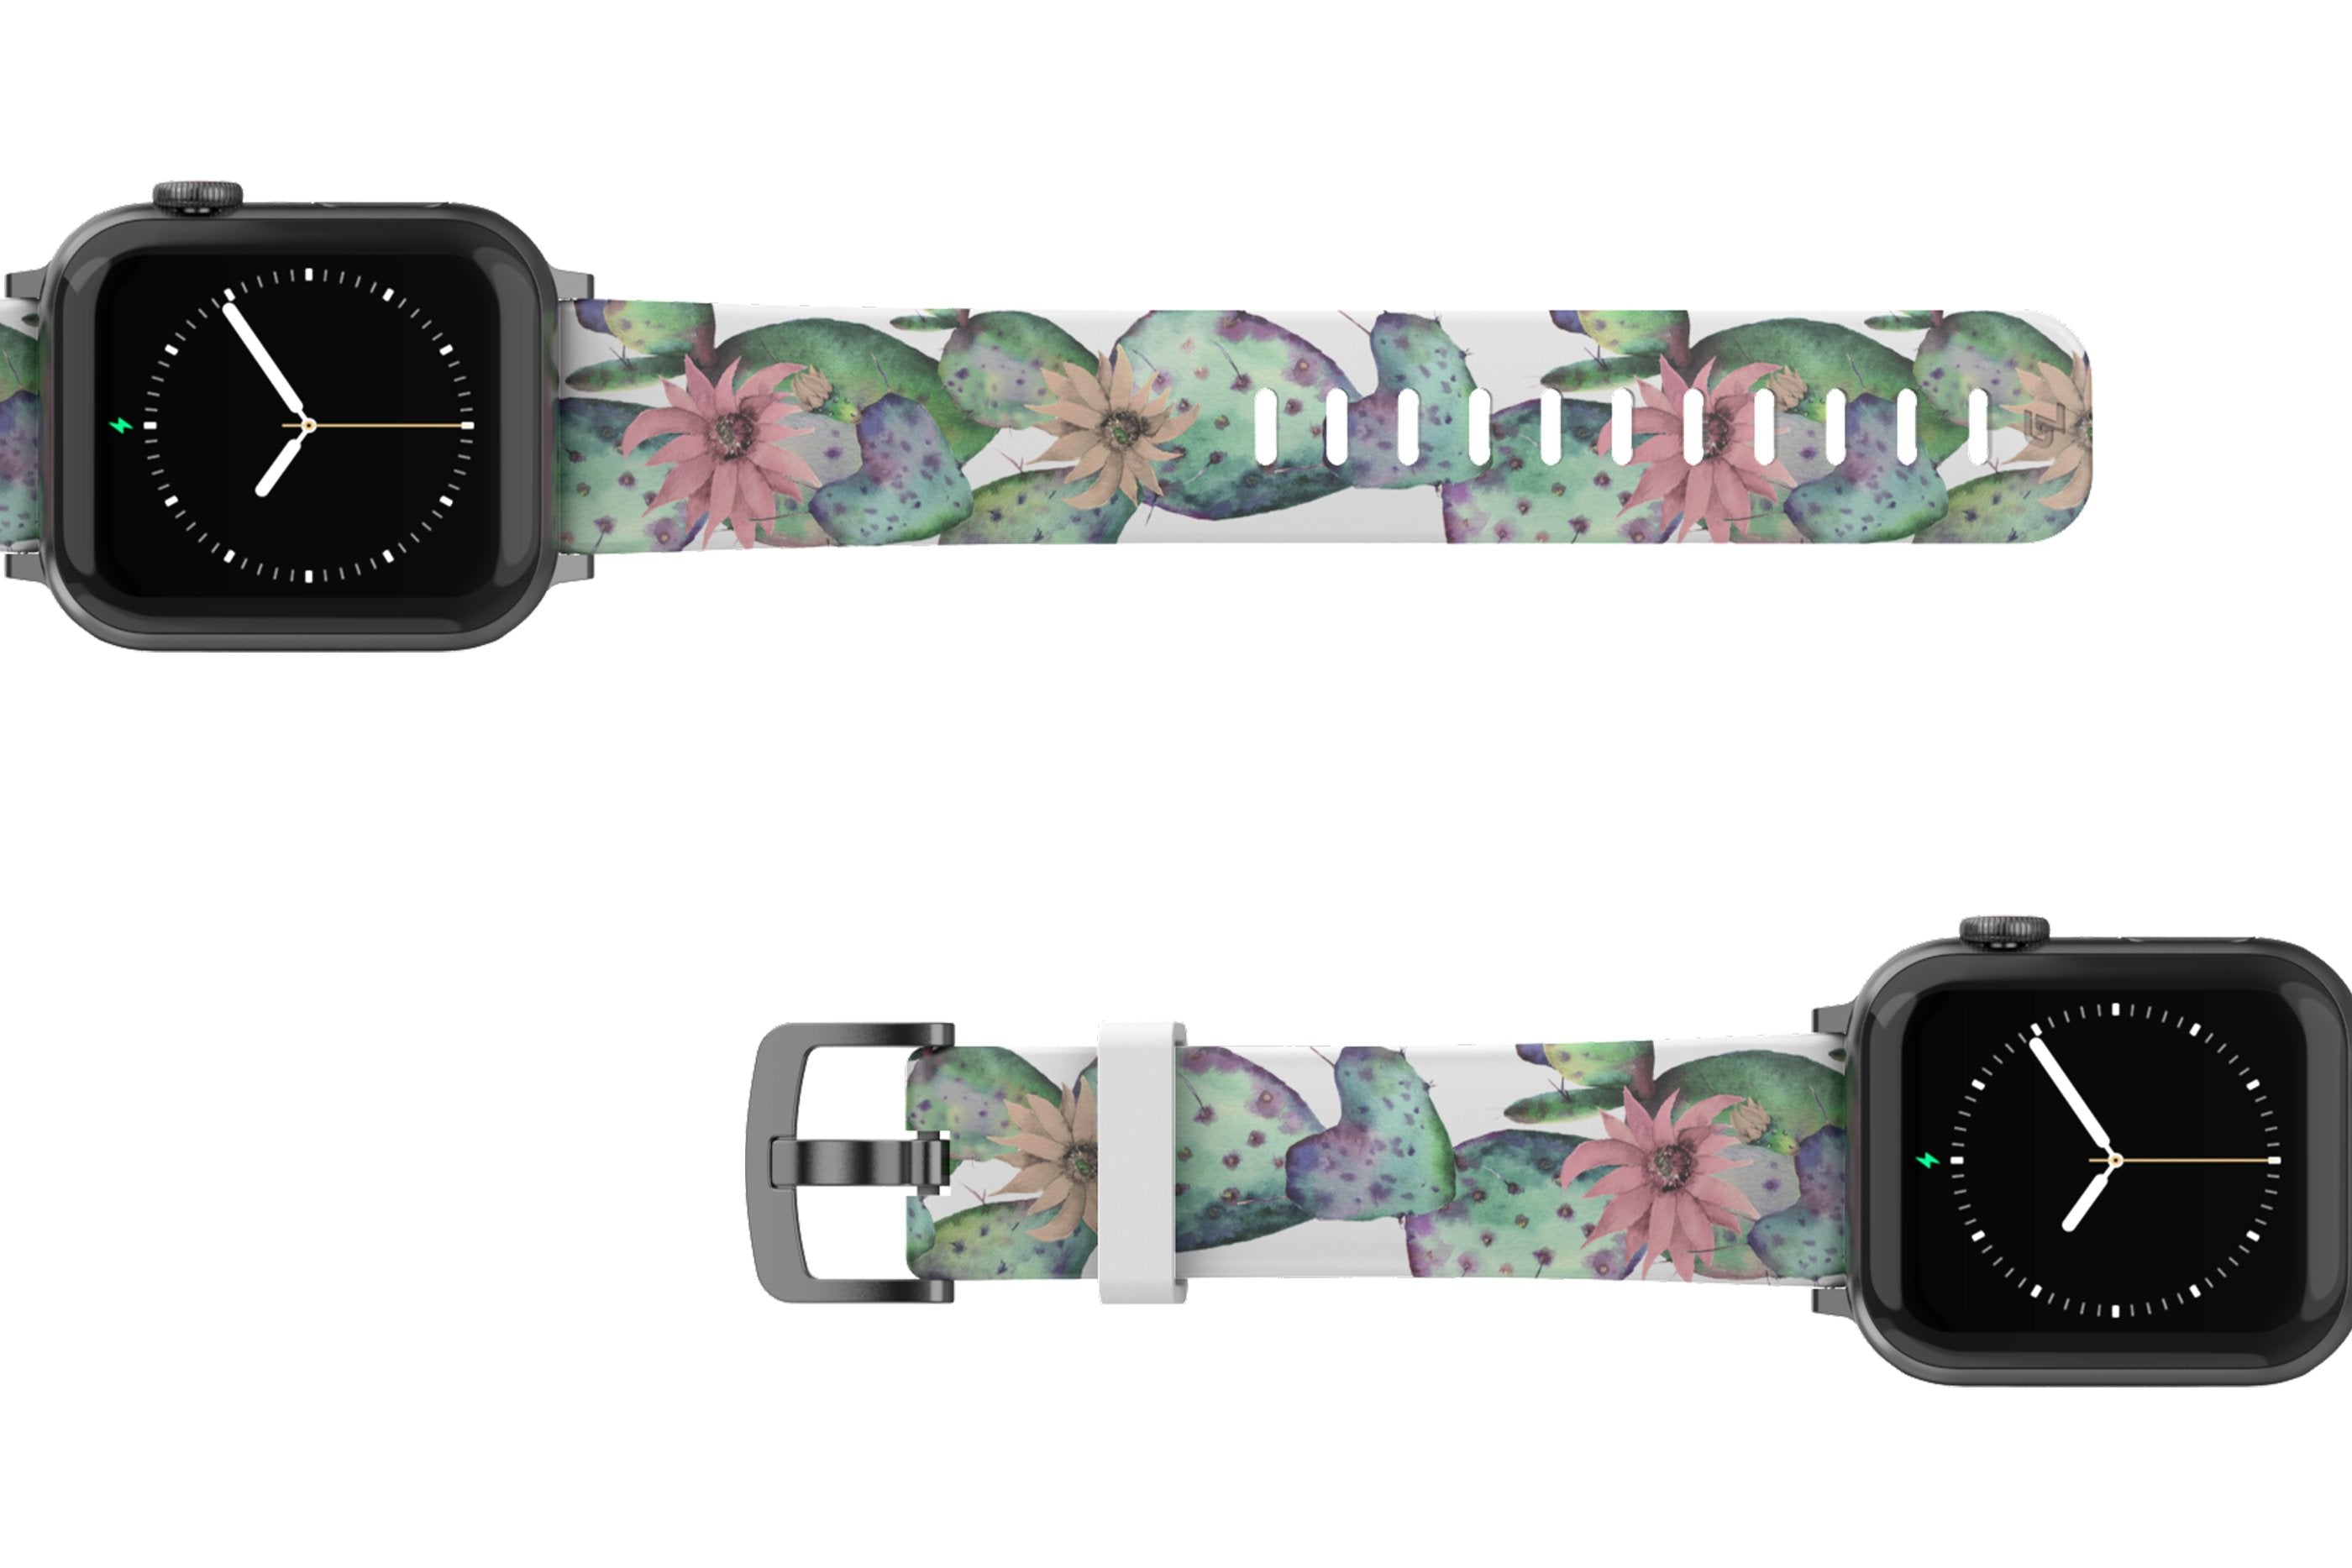 Cactus Bloom Apple Watch Band with gray hardware viewed top down